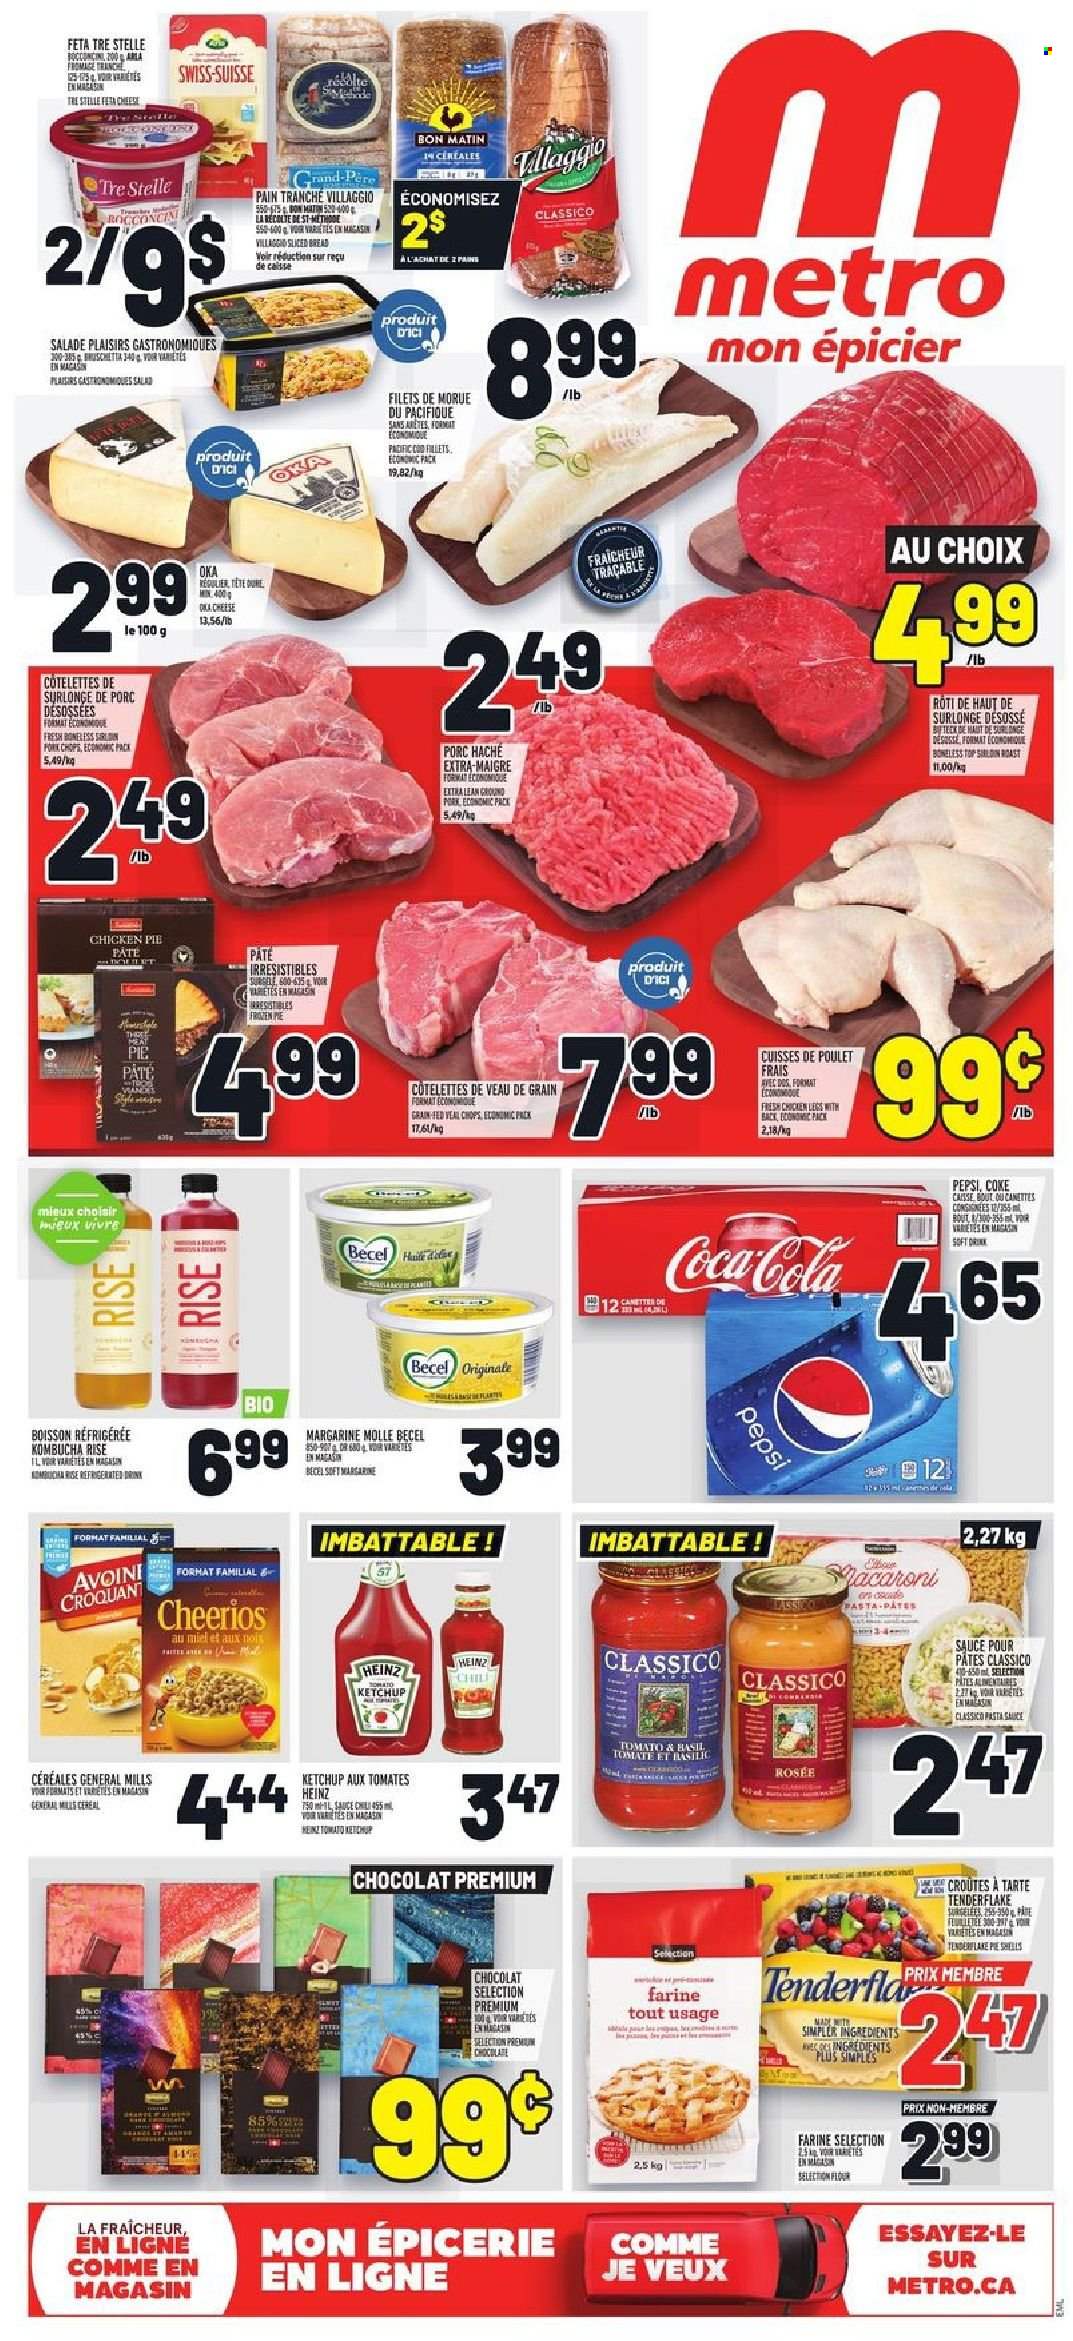 thumbnail - Metro Flyer - October 14, 2021 - October 20, 2021 - Sales products - cod, pasta, cheese, feta, margarine, flour, Heinz, cereals, Cheerios, Classico, Coca-Cola, Pepsi, soft drink, kombucha, veal cutlet, veal meat, pork chops, pork meat, ketchup. Page 1.